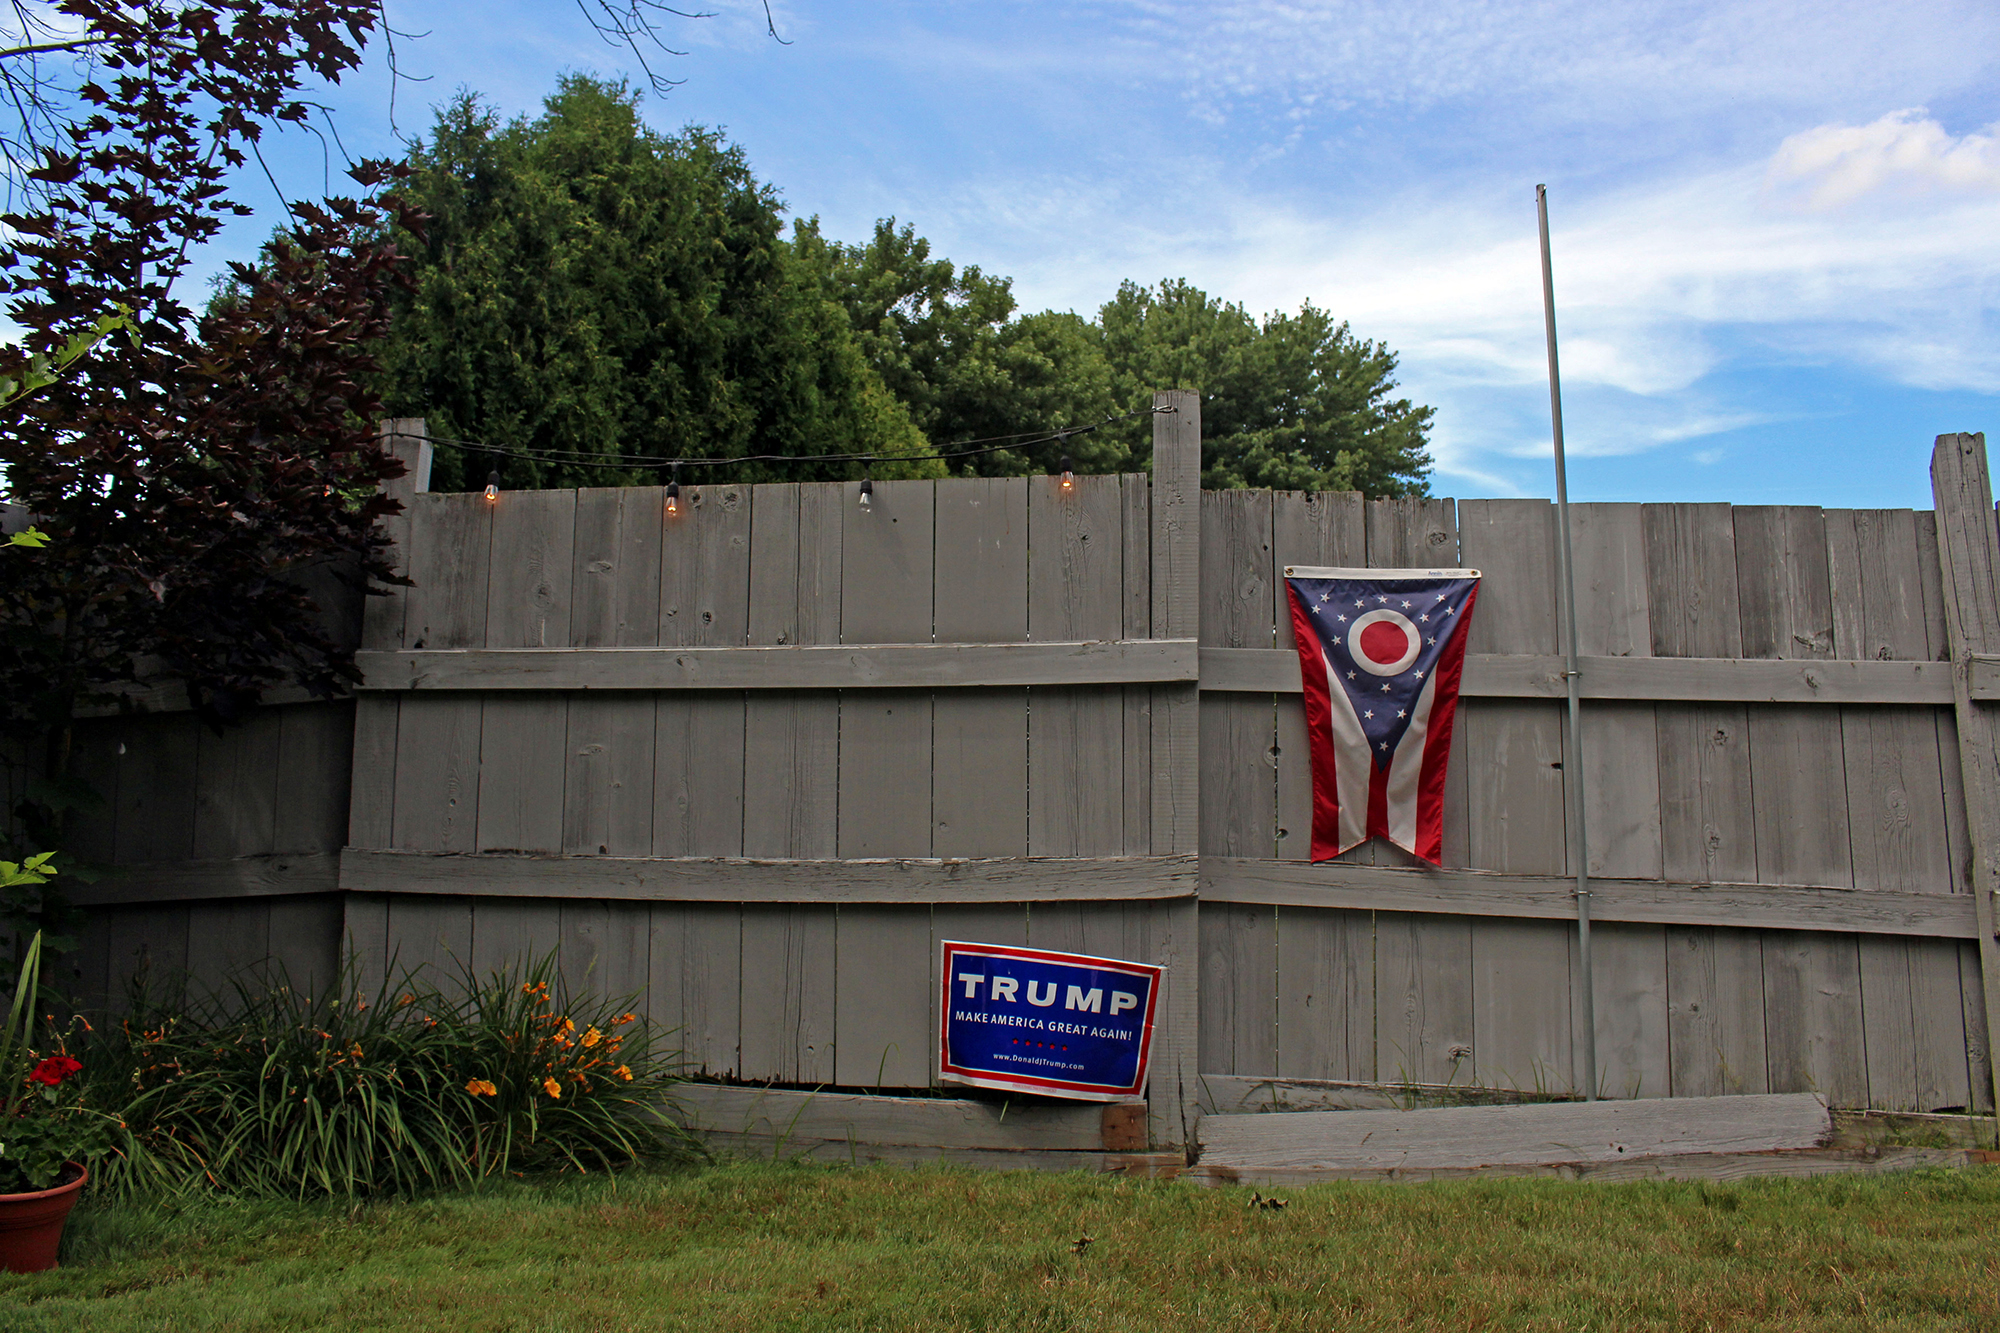 A Donald Trump campaign sign and Ohio state flag decorate Miller's backyard. Miller is leading a grassroots movement encouraging Democratic voters to vote for Trump in November’s general election. (Emily Mills/News21)